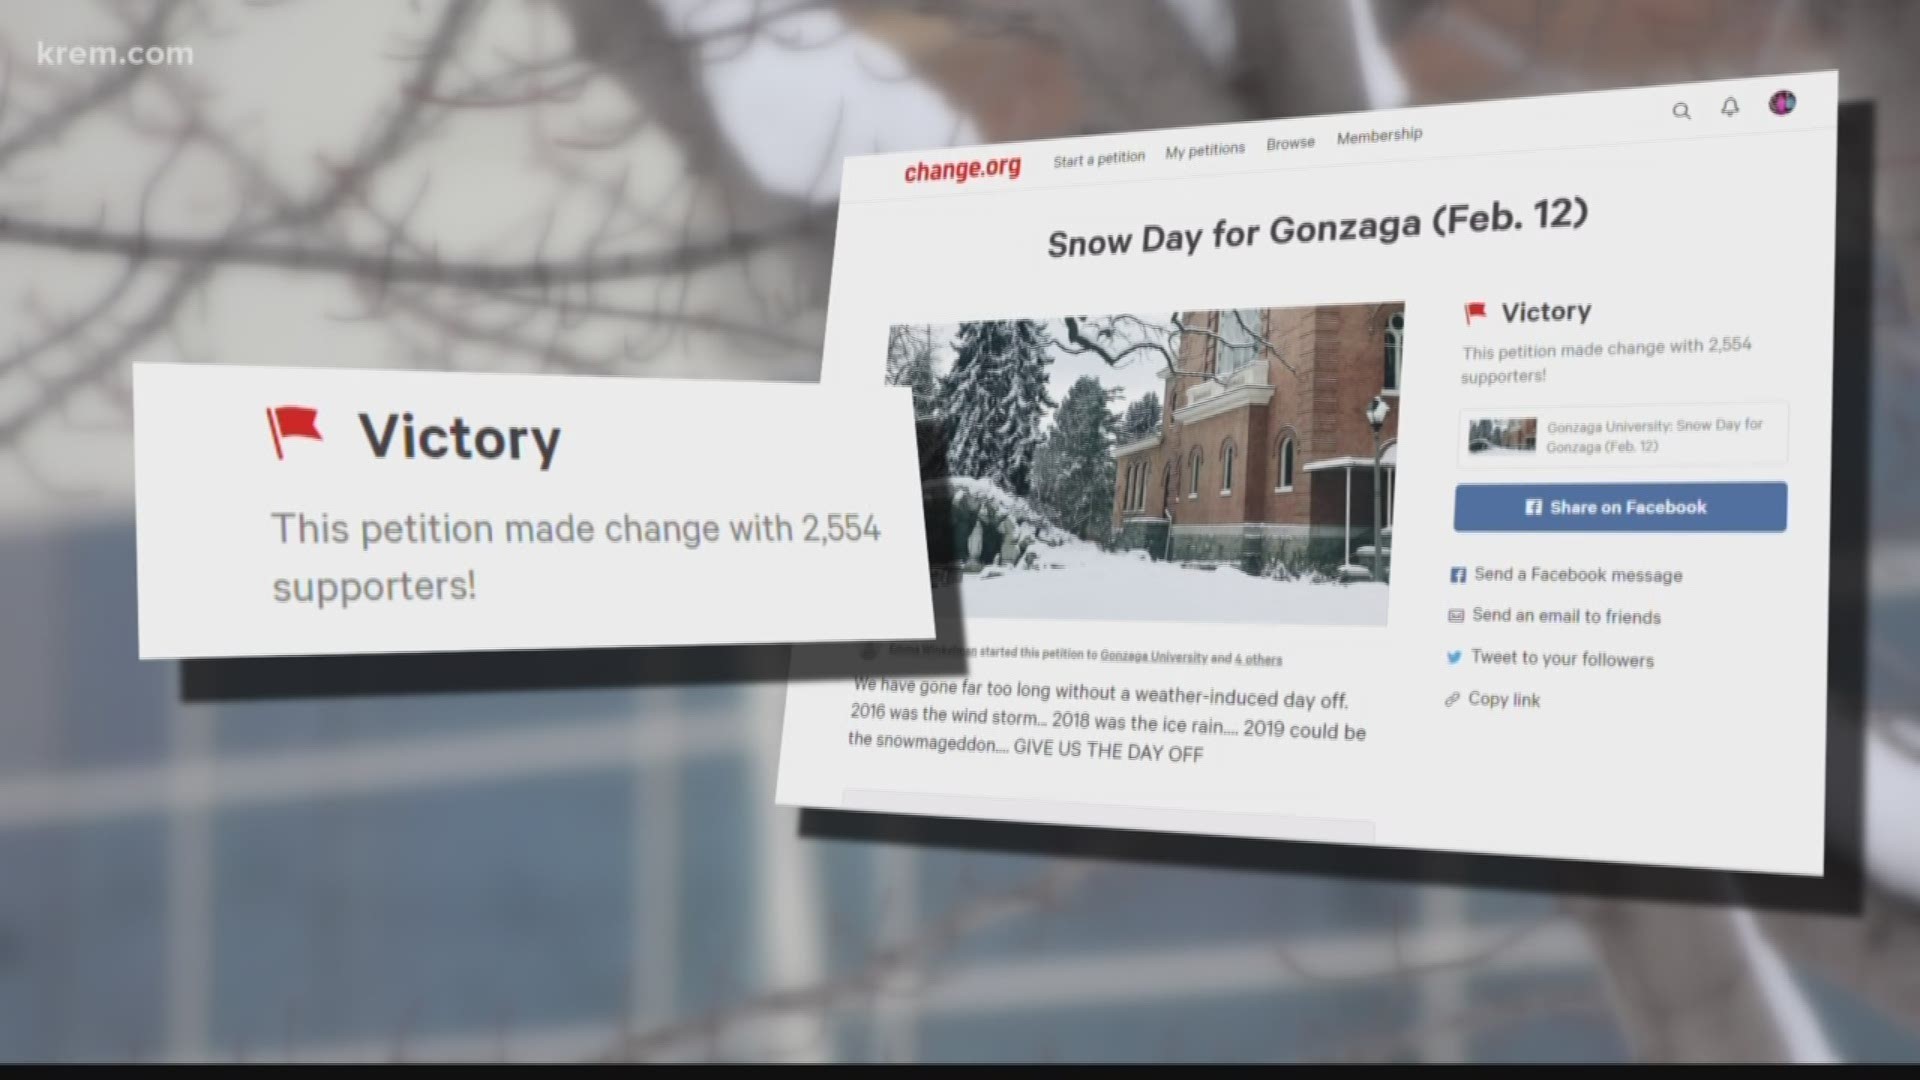 More than 2,500 students signed the petition after Gonzaga did not cancel classes on Monday.